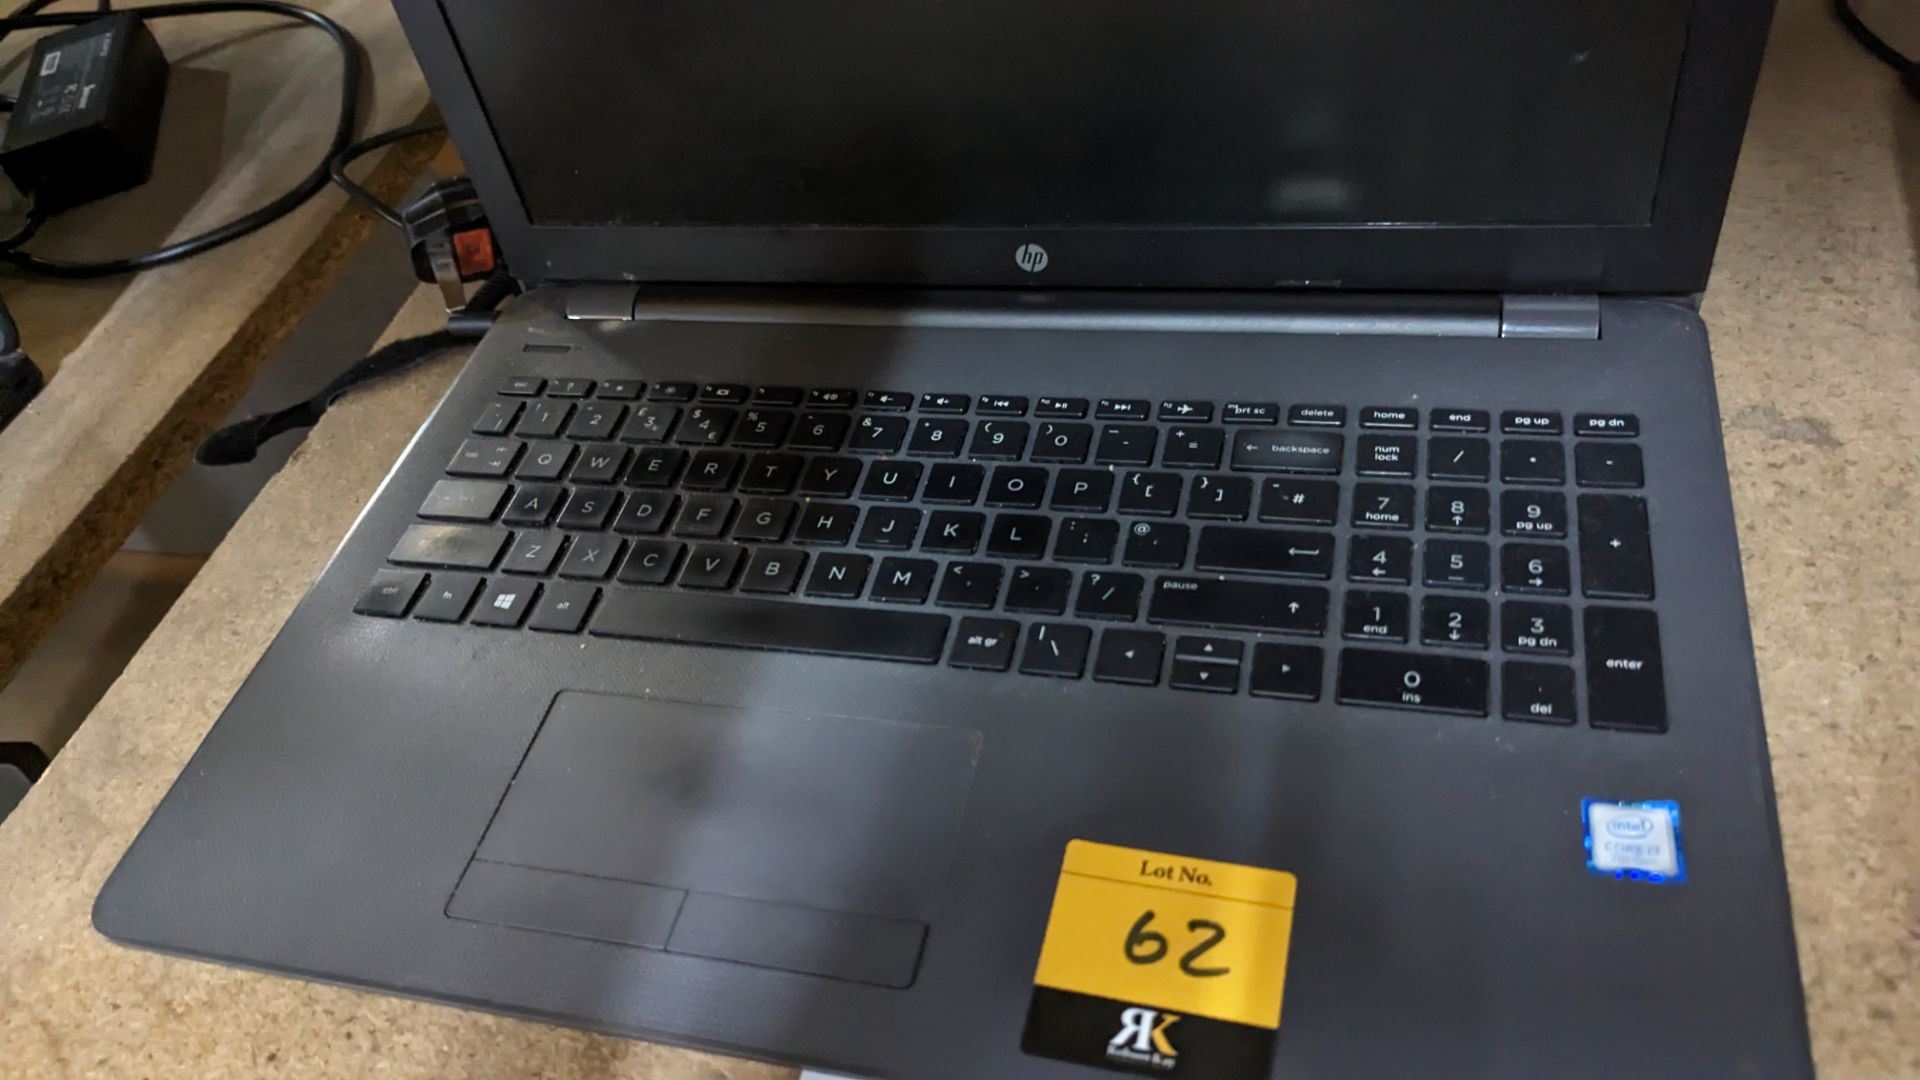 HP 250 notebook computer with Core i7-7500 CPU, 8GB RAM, 250 GB SSD, including power pack/charger - Image 8 of 12